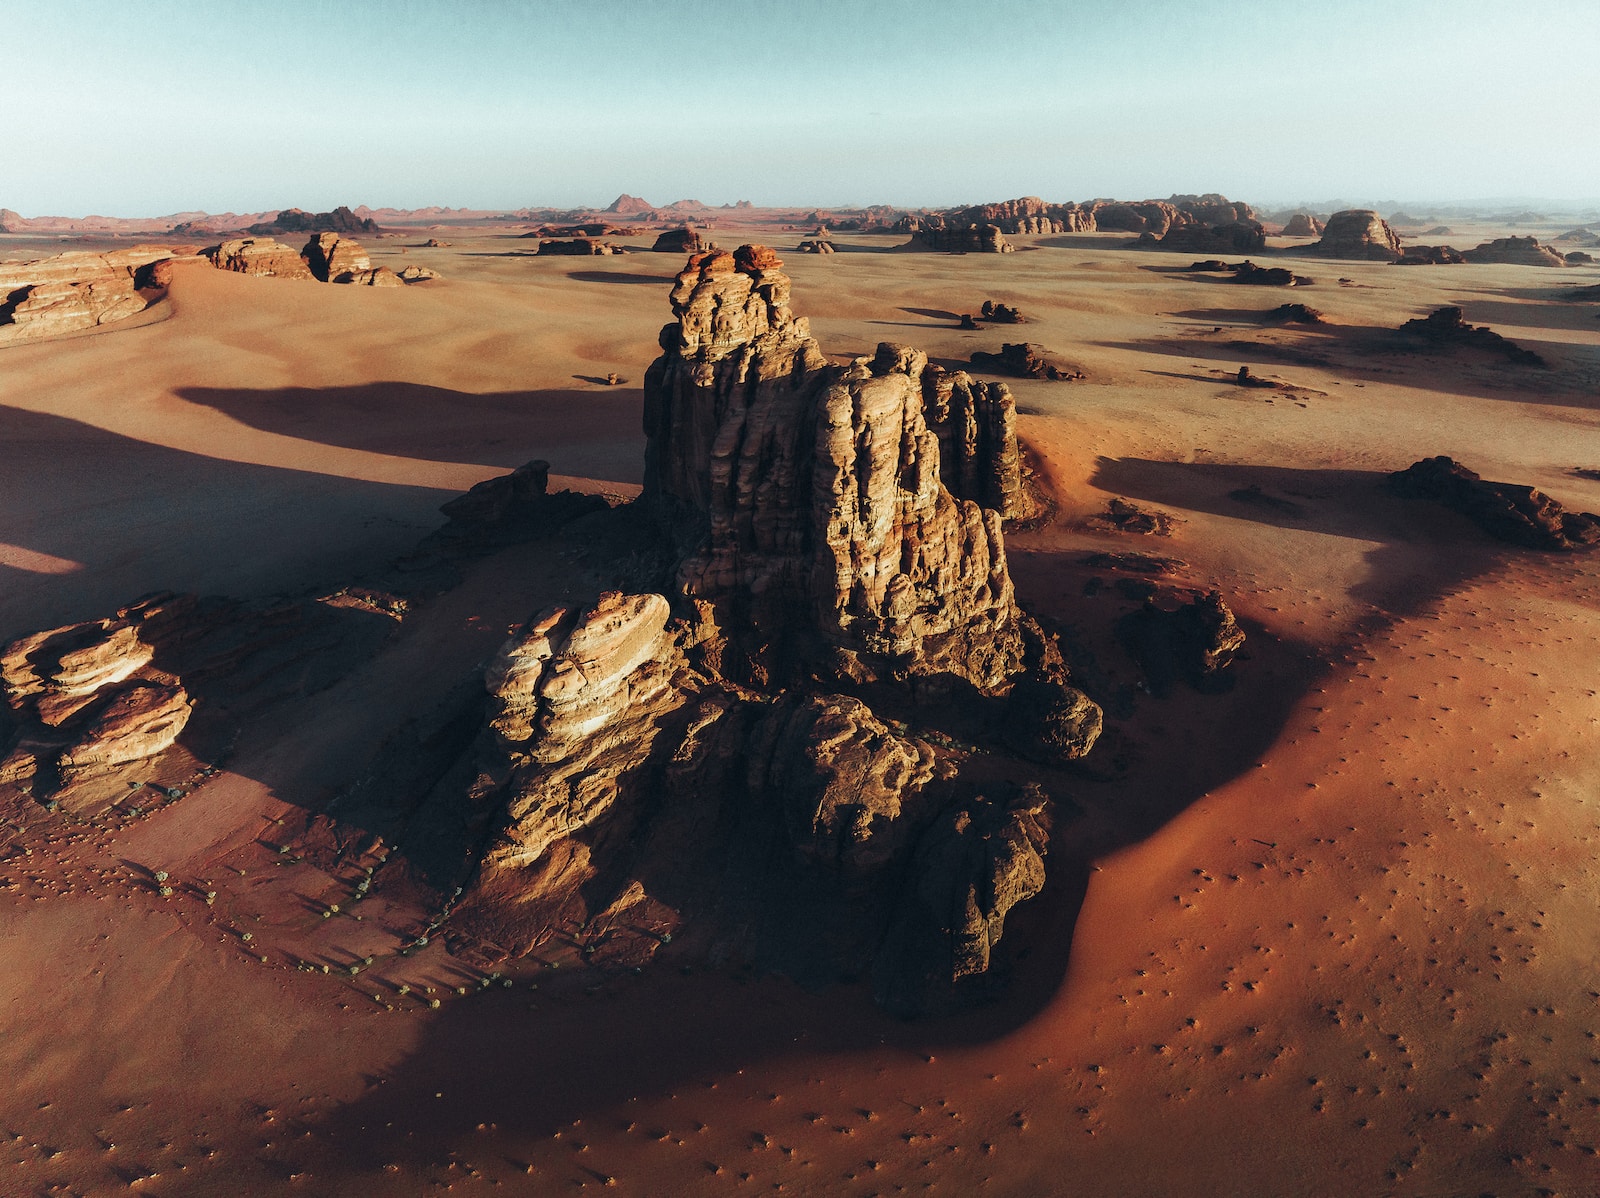 Top places to visit in the world, an aerial view of a desert with rocks and sand